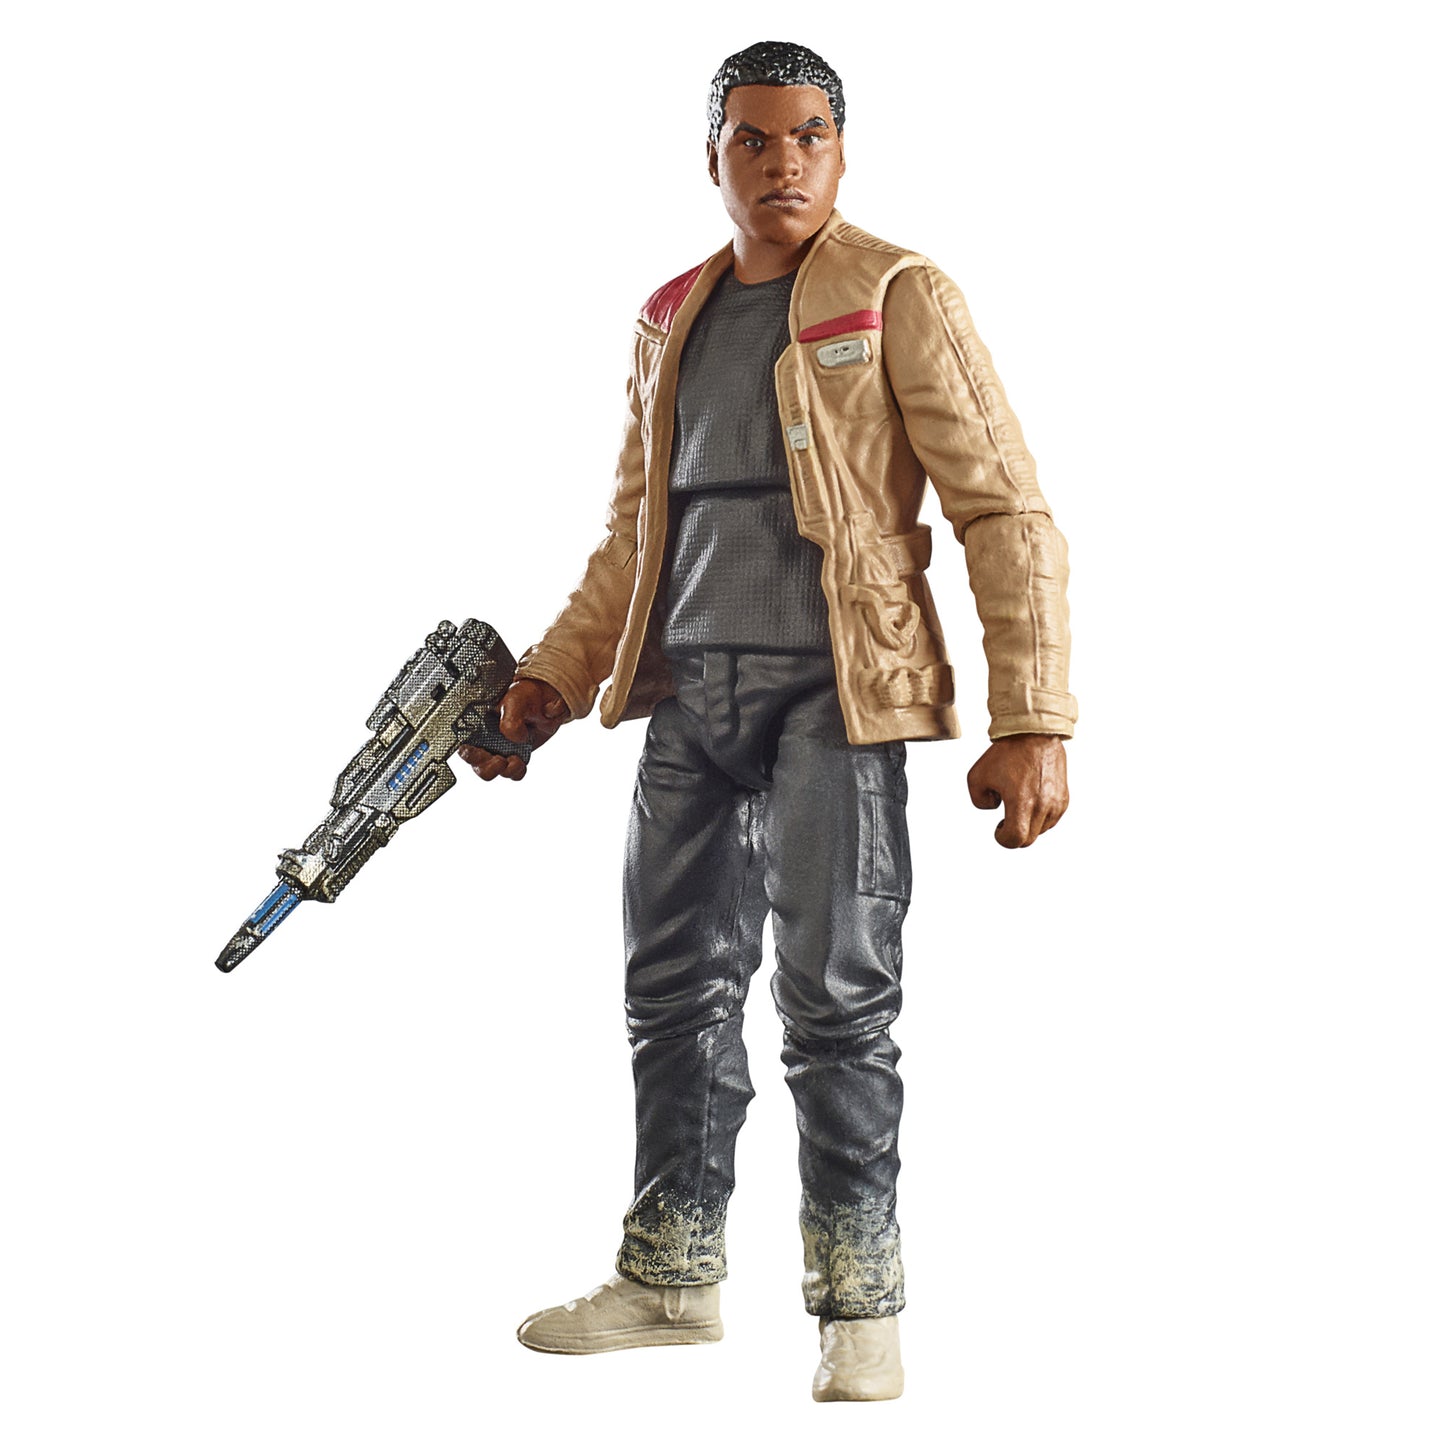 Star Wars The Vintage Collection Finn (Starkiller Base), Star Wars: The Force Awakens 3.75 Inch Collectible Action Figure